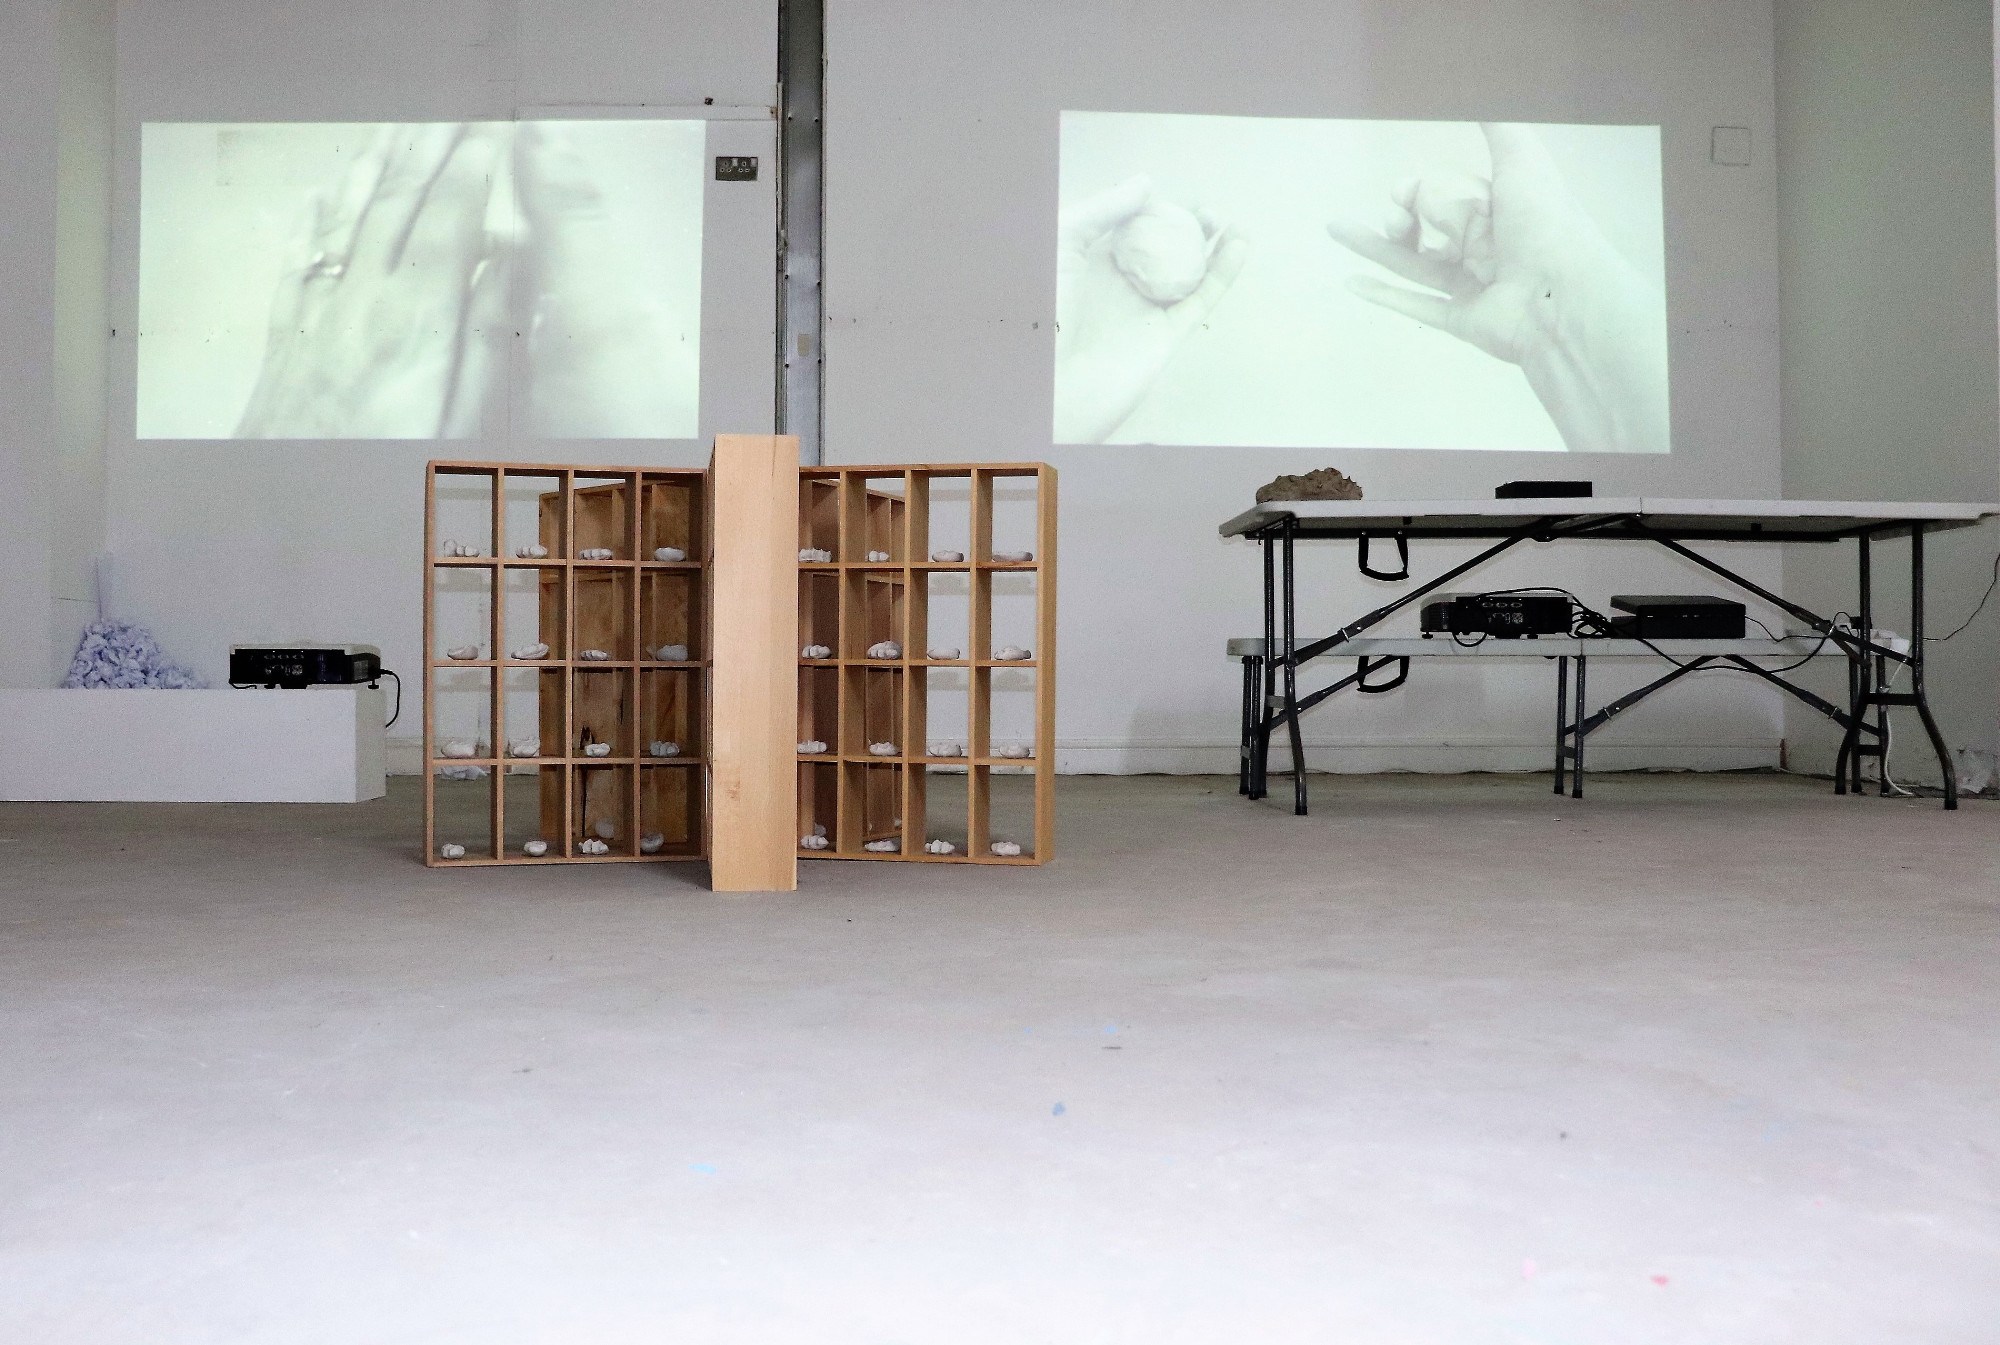 'Holding on' 2019, Installation - Ceramics, paper, clay, video projection, wooden shelving - Sarah Strachan